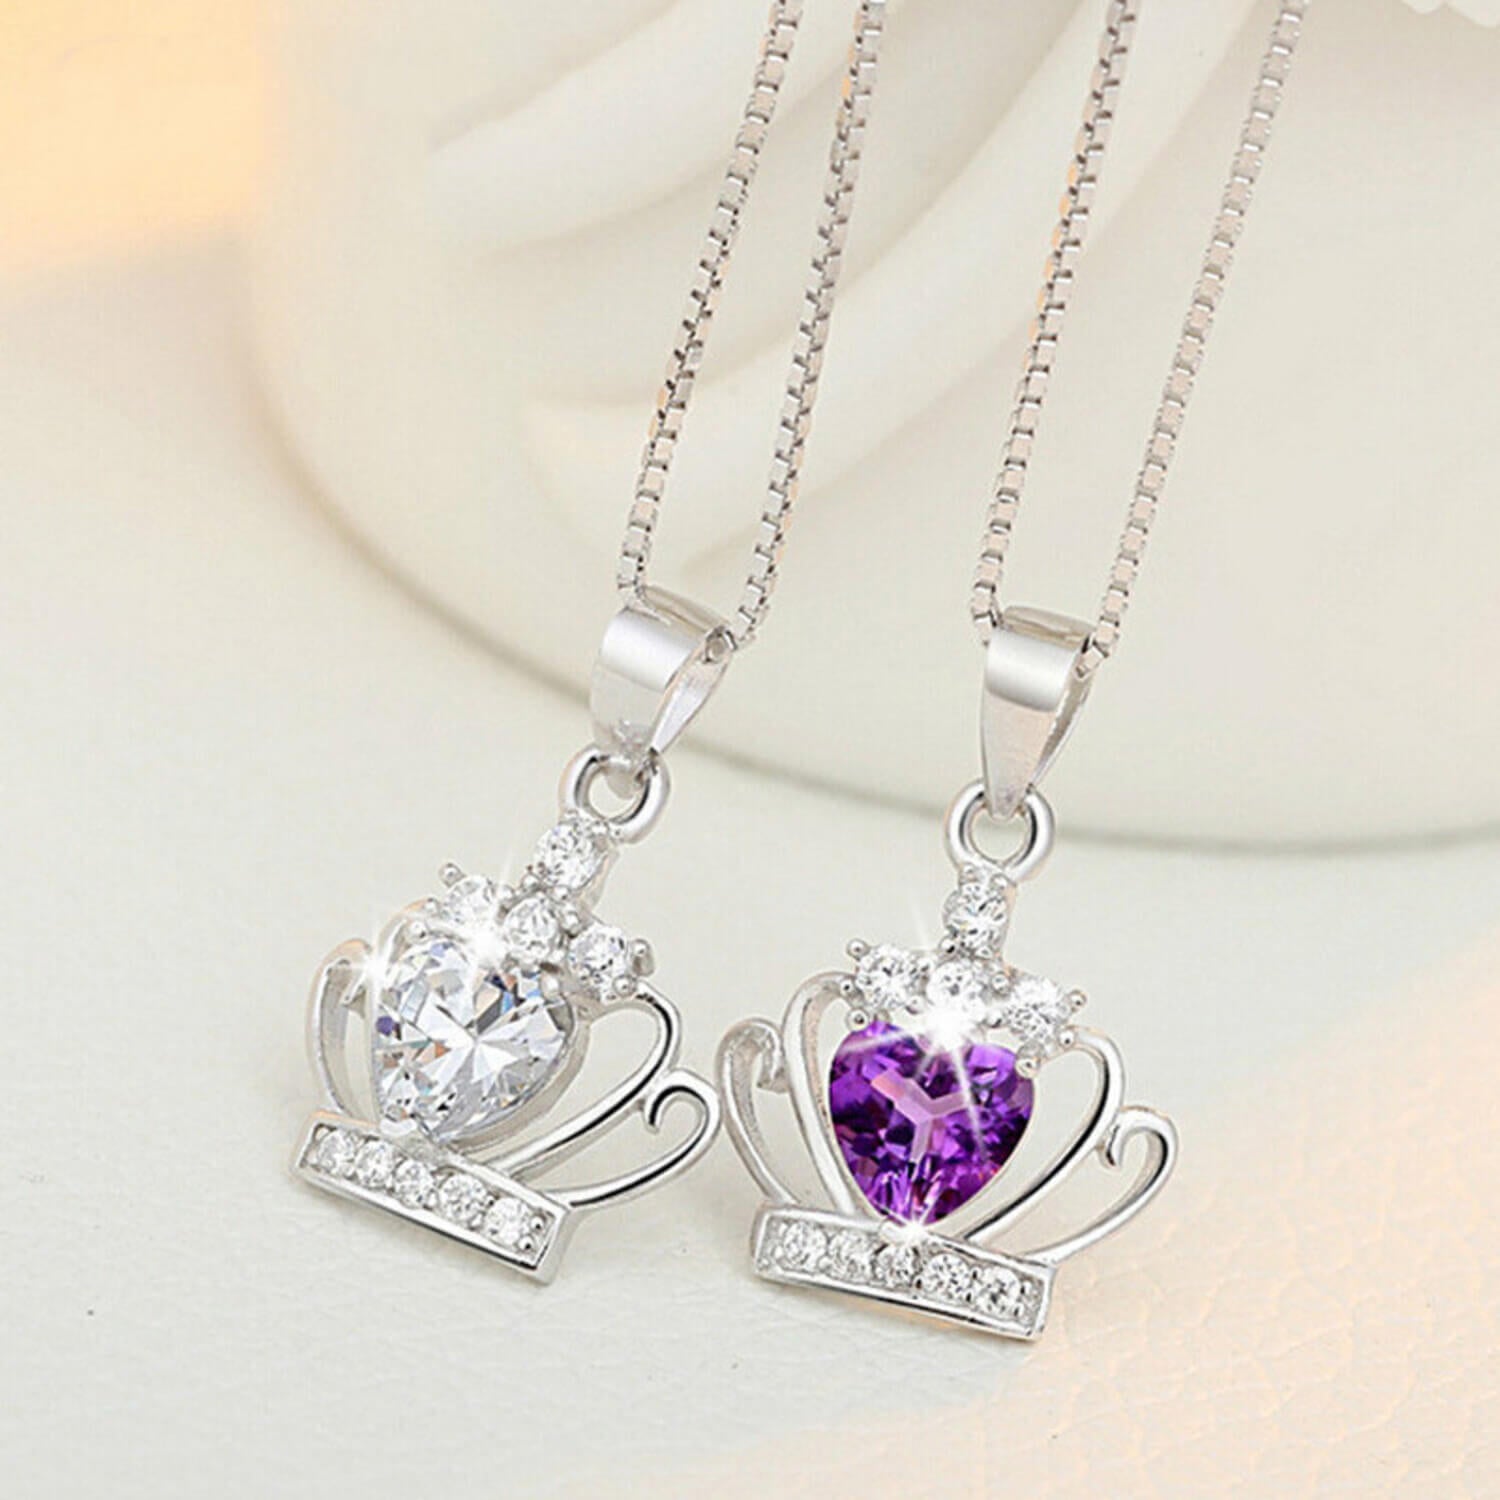 whit and purple diamond crown necklace